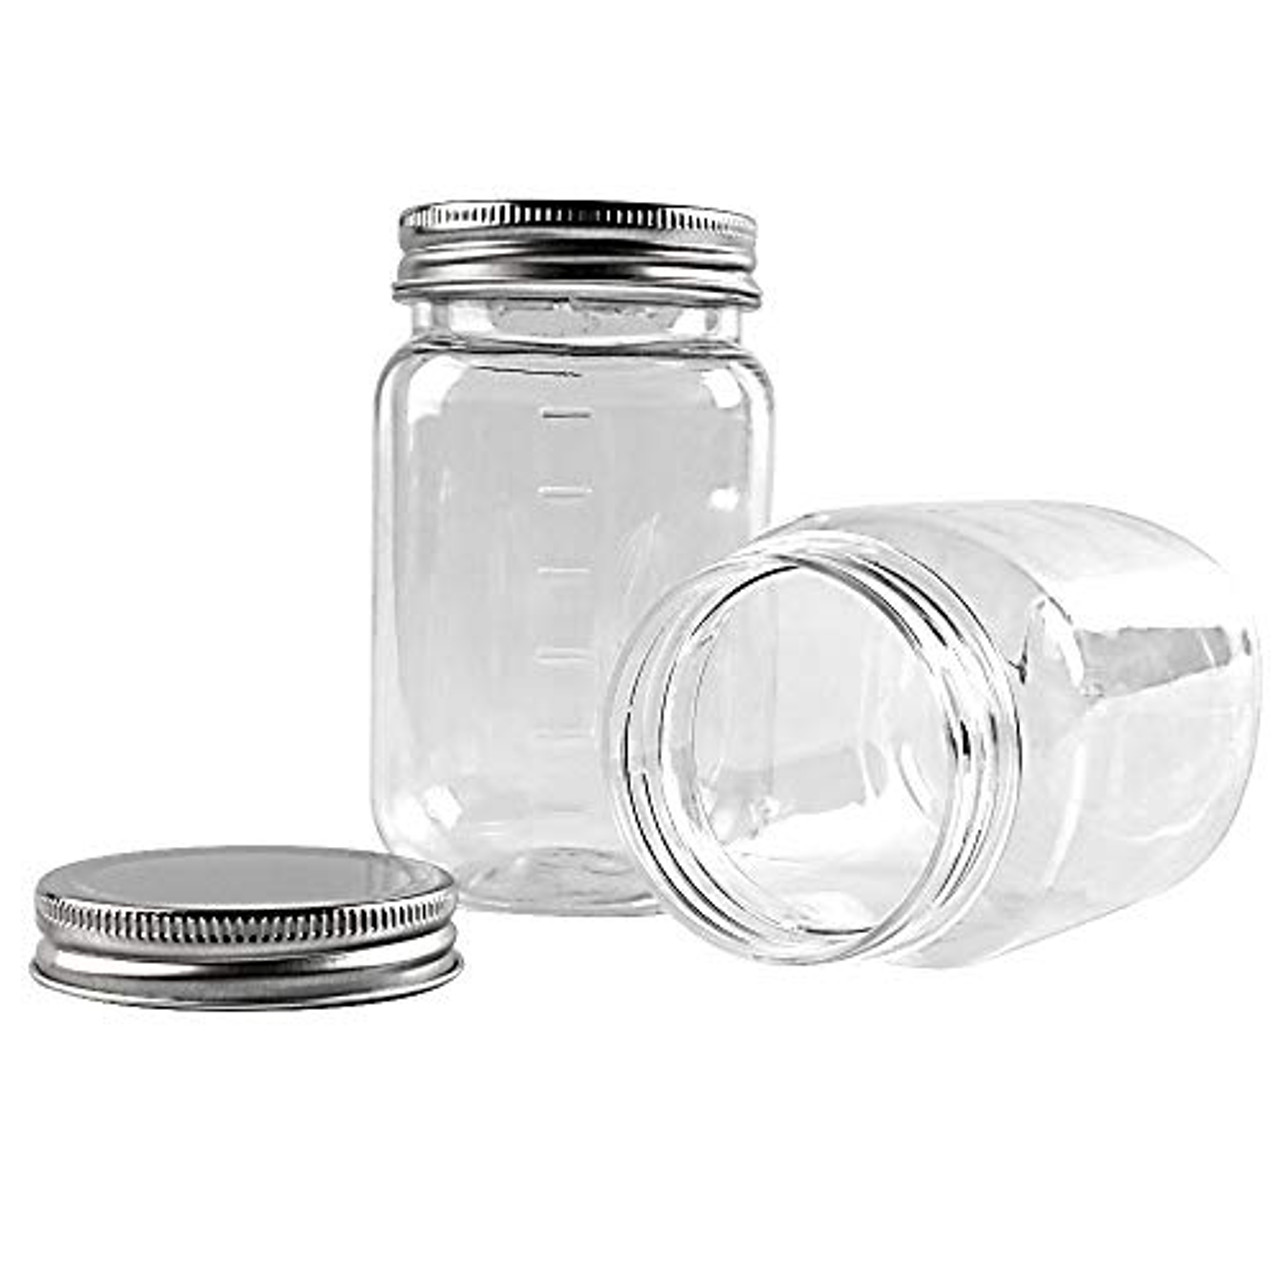 RW Base 2 oz Round Clear Plastic Candy and Snack Jar - with Silver Aluminum  Lid - 2 x 2 x 1 3/4 - 100 count box